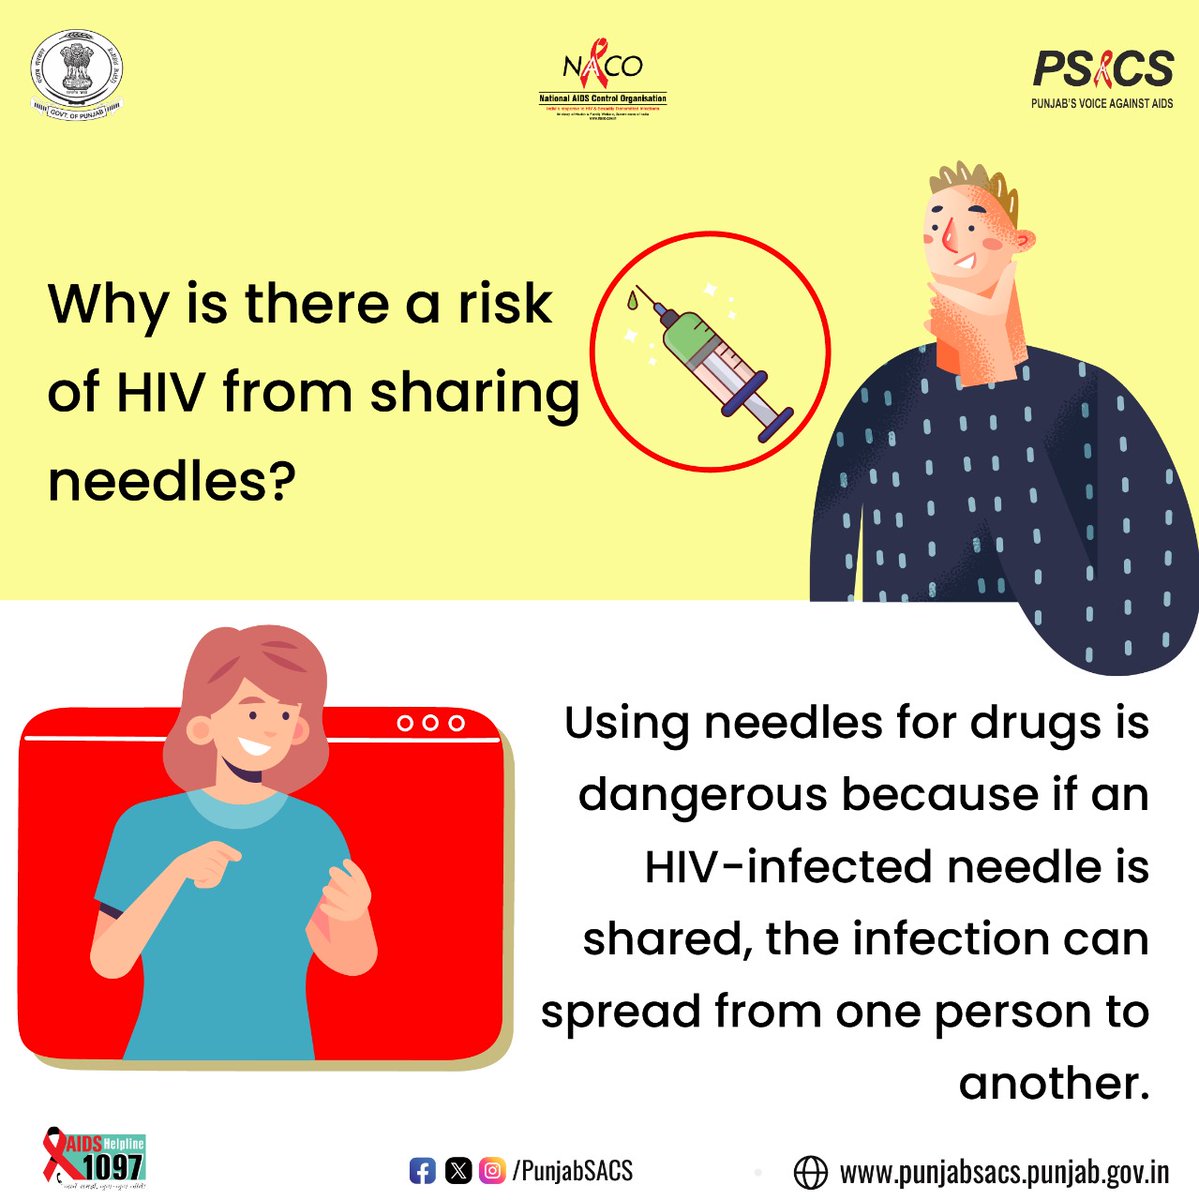 Using needles for drugs is dangerous because if an HIV-infected needle is shared, the infection can spread from one person to another.

#HIVTesting #GetTested #KnowYourHIVStatus #Dial1097 #KnowAIDS #HIVTestingisImportant #KnowHIV #HIVFreeIndia #CorrectInformation #NACOINDIA #NACO